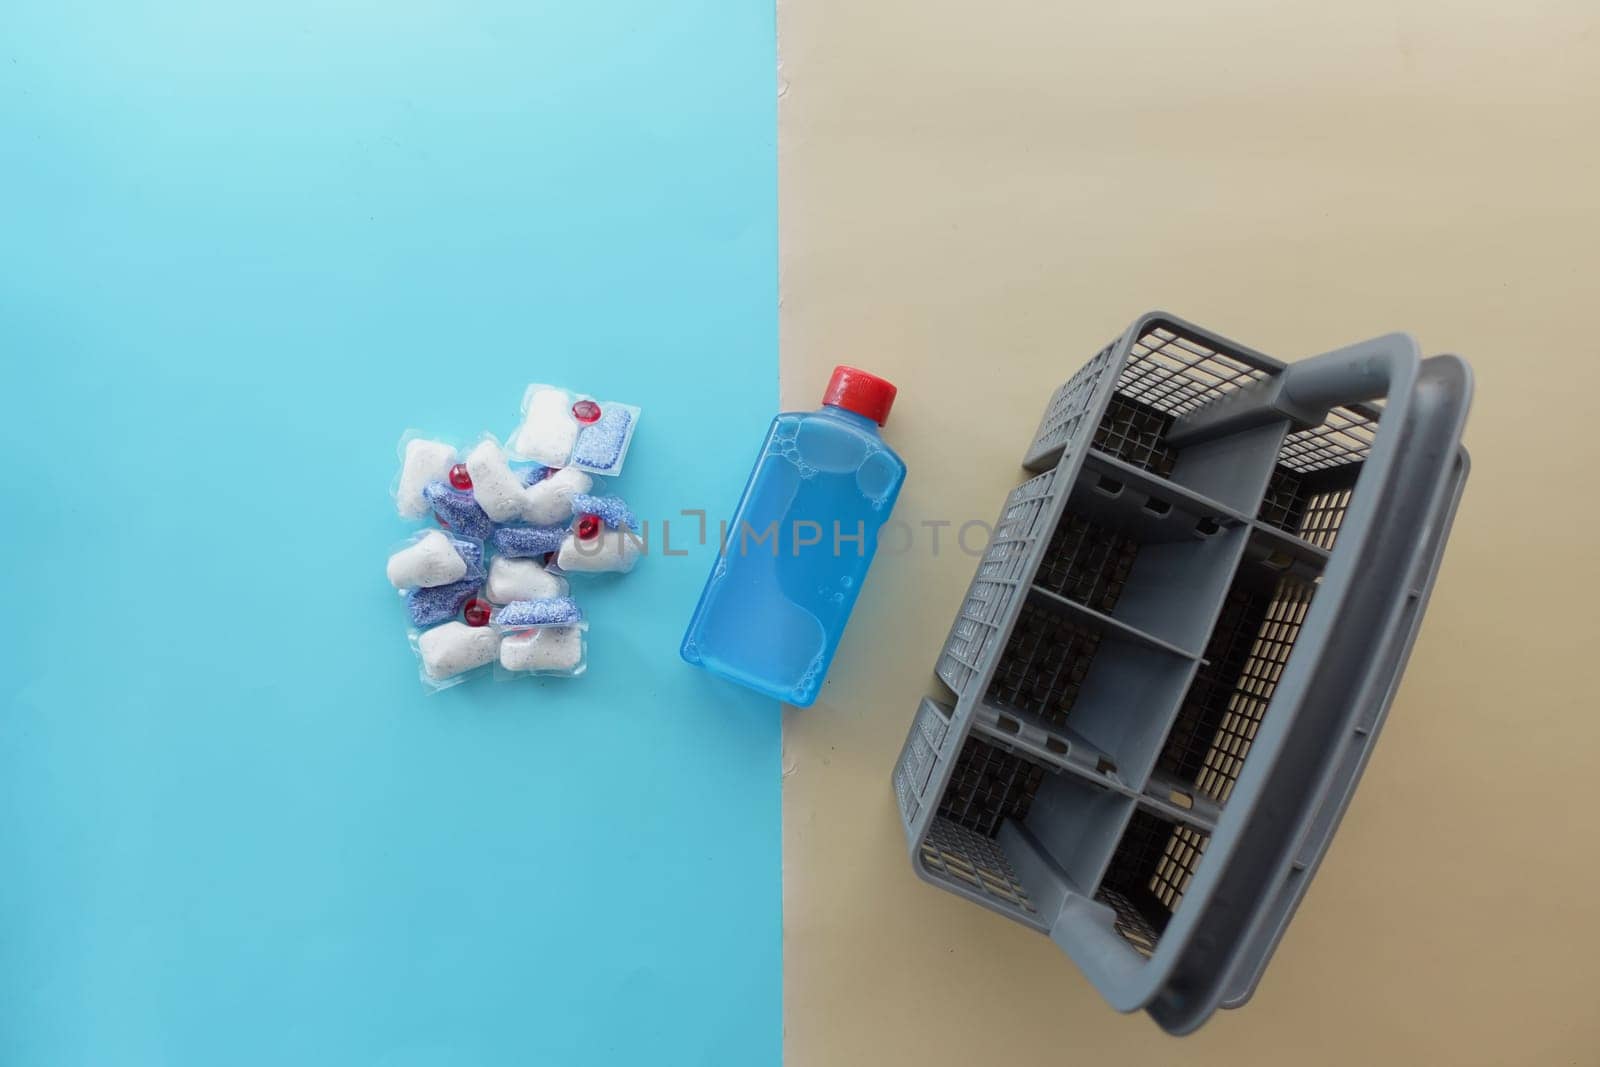 A stack of dishwasher tablets and a bottle of detergent on a blue background by towfiq007